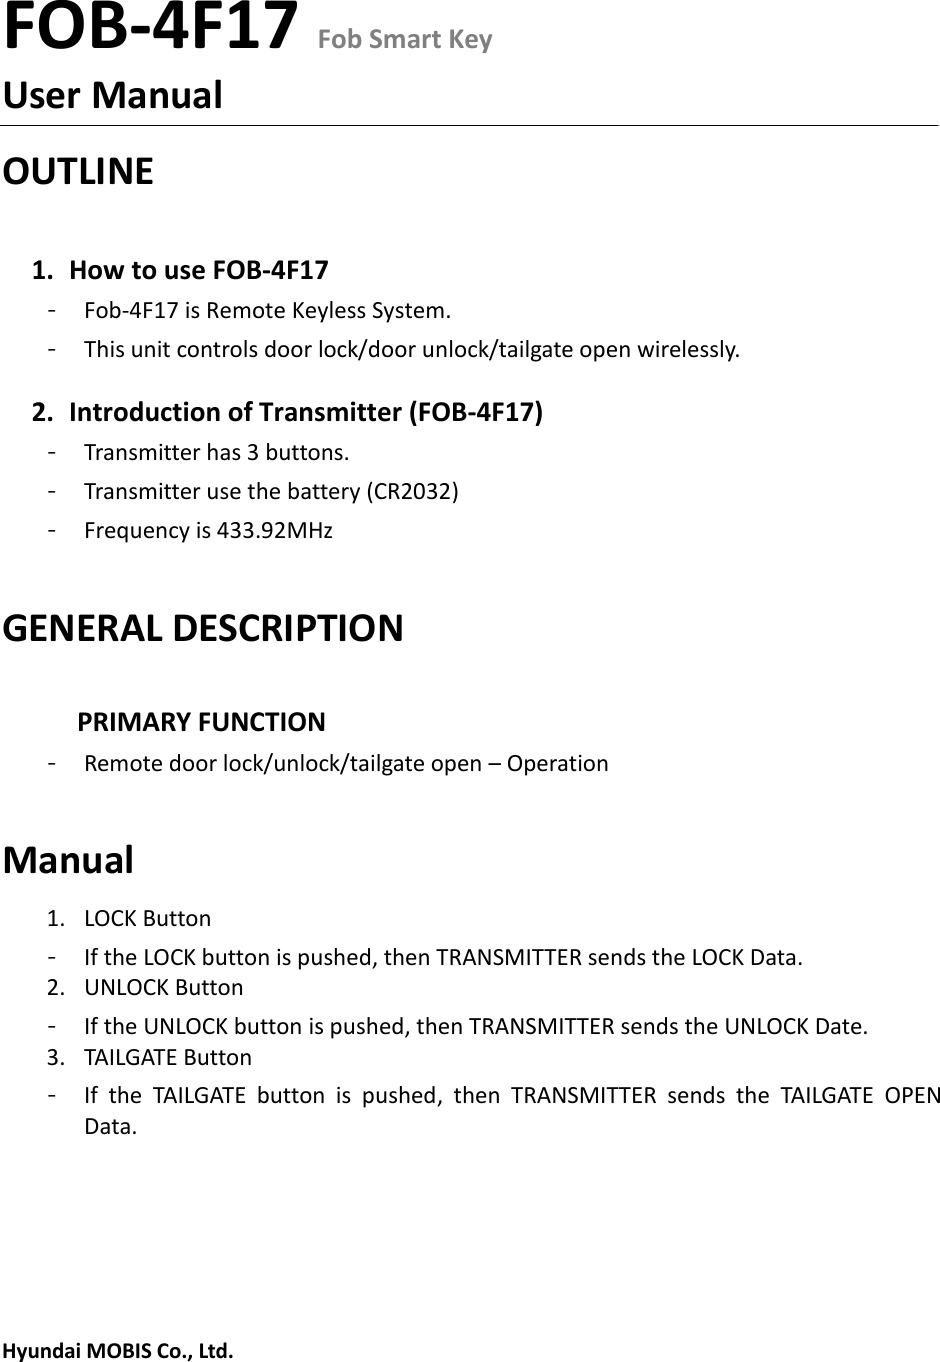 FOB-4F17 Fob Smart KeyUser Manual OUTLINE 1. How to use FOB-4F17- Fob-4F17 is Remote Keyless System.- This unit controls door lock/door unlock/tailgate open wirelessly. 2. Introduction of Transmitter (FOB-4F17)- Transmitter has 3 buttons. - Transmitter use the battery (CR2032) - Frequency is 433.92MHz GENERAL DESCRIPTION PRIMARY FUNCTION - Remote door lock/unlock/tailgate open – Operation Manual 1. LOCK Button- If the LOCK button is pushed, then TRANSMITTER sends the LOCK Data. 2. UNLOCK Button- If the UNLOCK button is pushed, then TRANSMITTER sends the UNLOCK Date. 3. TAILGATE Button- If  the  TAILGATE  button  is  pushed,  then  TRANSMITTER  sends  the  TAILGATE  OPEN Data. Hyundai MOBIS Co., Ltd. 